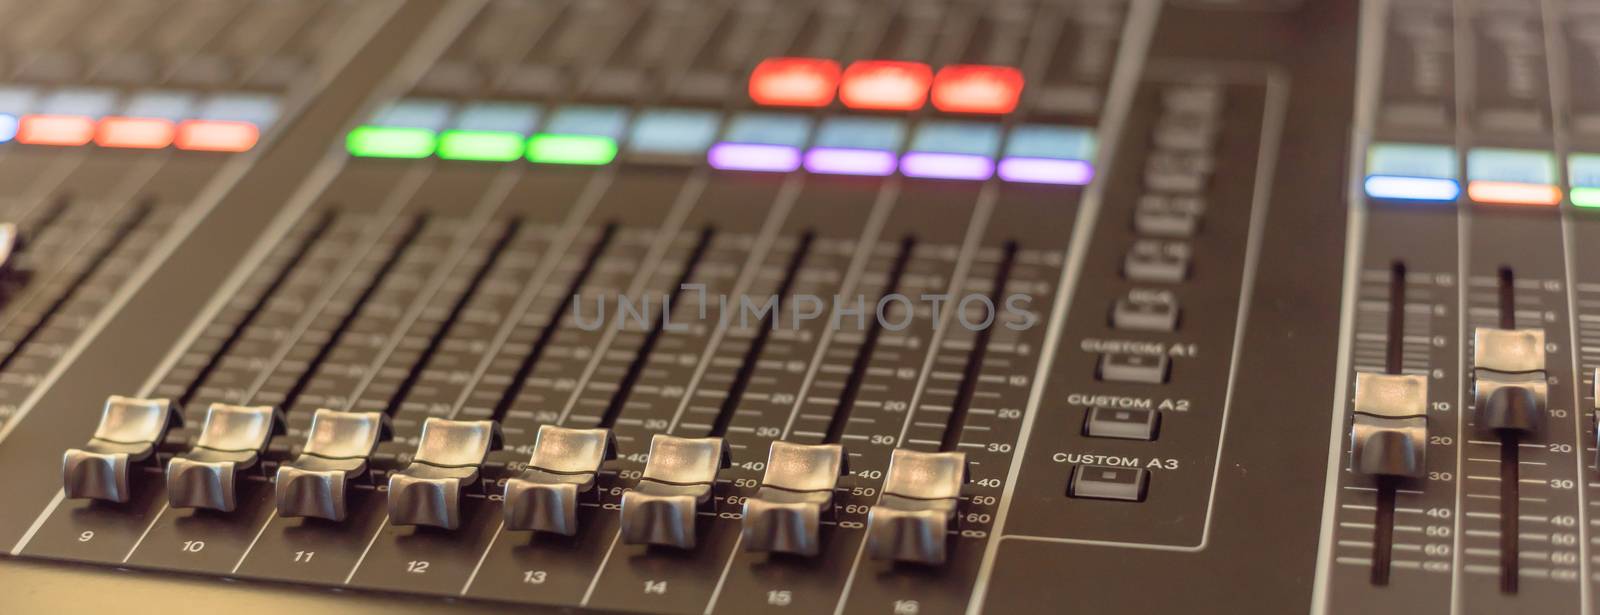 Panorama close-up buttons equipment for sound mixer control. Mixer for musician DJ and sound engineers. Mixing DJ remote with colorful neon light. Night club, nightlife concept